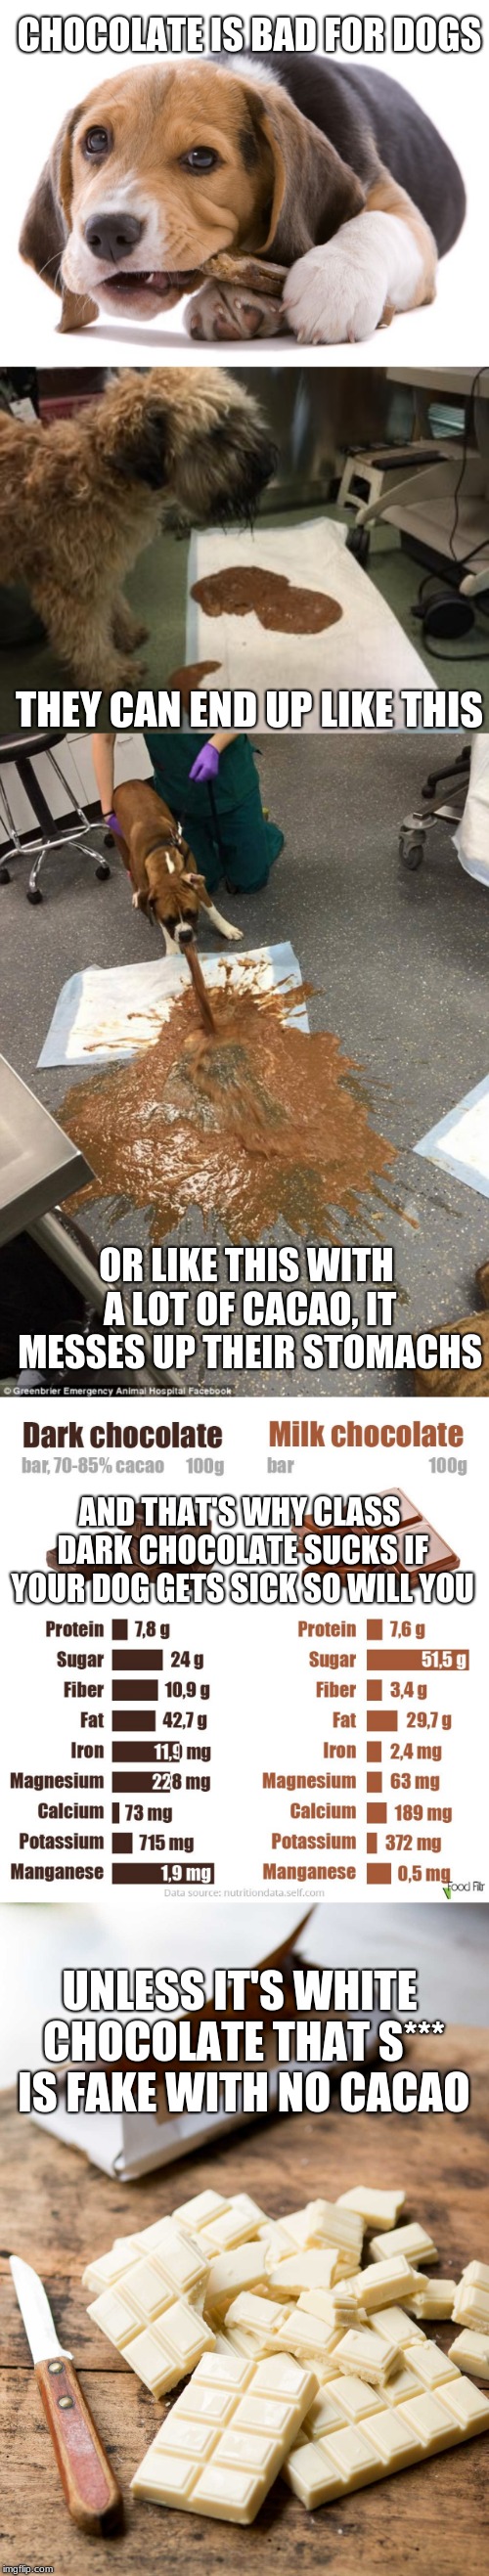 It's true they get a stomach ache and if it's 85% or more they can die (Weekly lessons ep 4) | CHOCOLATE IS BAD FOR DOGS; THEY CAN END UP LIKE THIS; OR LIKE THIS WITH A LOT OF CACAO, IT MESSES UP THEIR STOMACHS; AND THAT'S WHY CLASS DARK CHOCOLATE SUCKS IF YOUR DOG GETS SICK SO WILL YOU; UNLESS IT'S WHITE CHOCOLATE THAT S*** IS FAKE WITH NO CACAO | image tagged in memes,dj's lessons,sick dog,chocolate,dark chocolate sabe como caca,white chocolate es para los pinches gatos | made w/ Imgflip meme maker